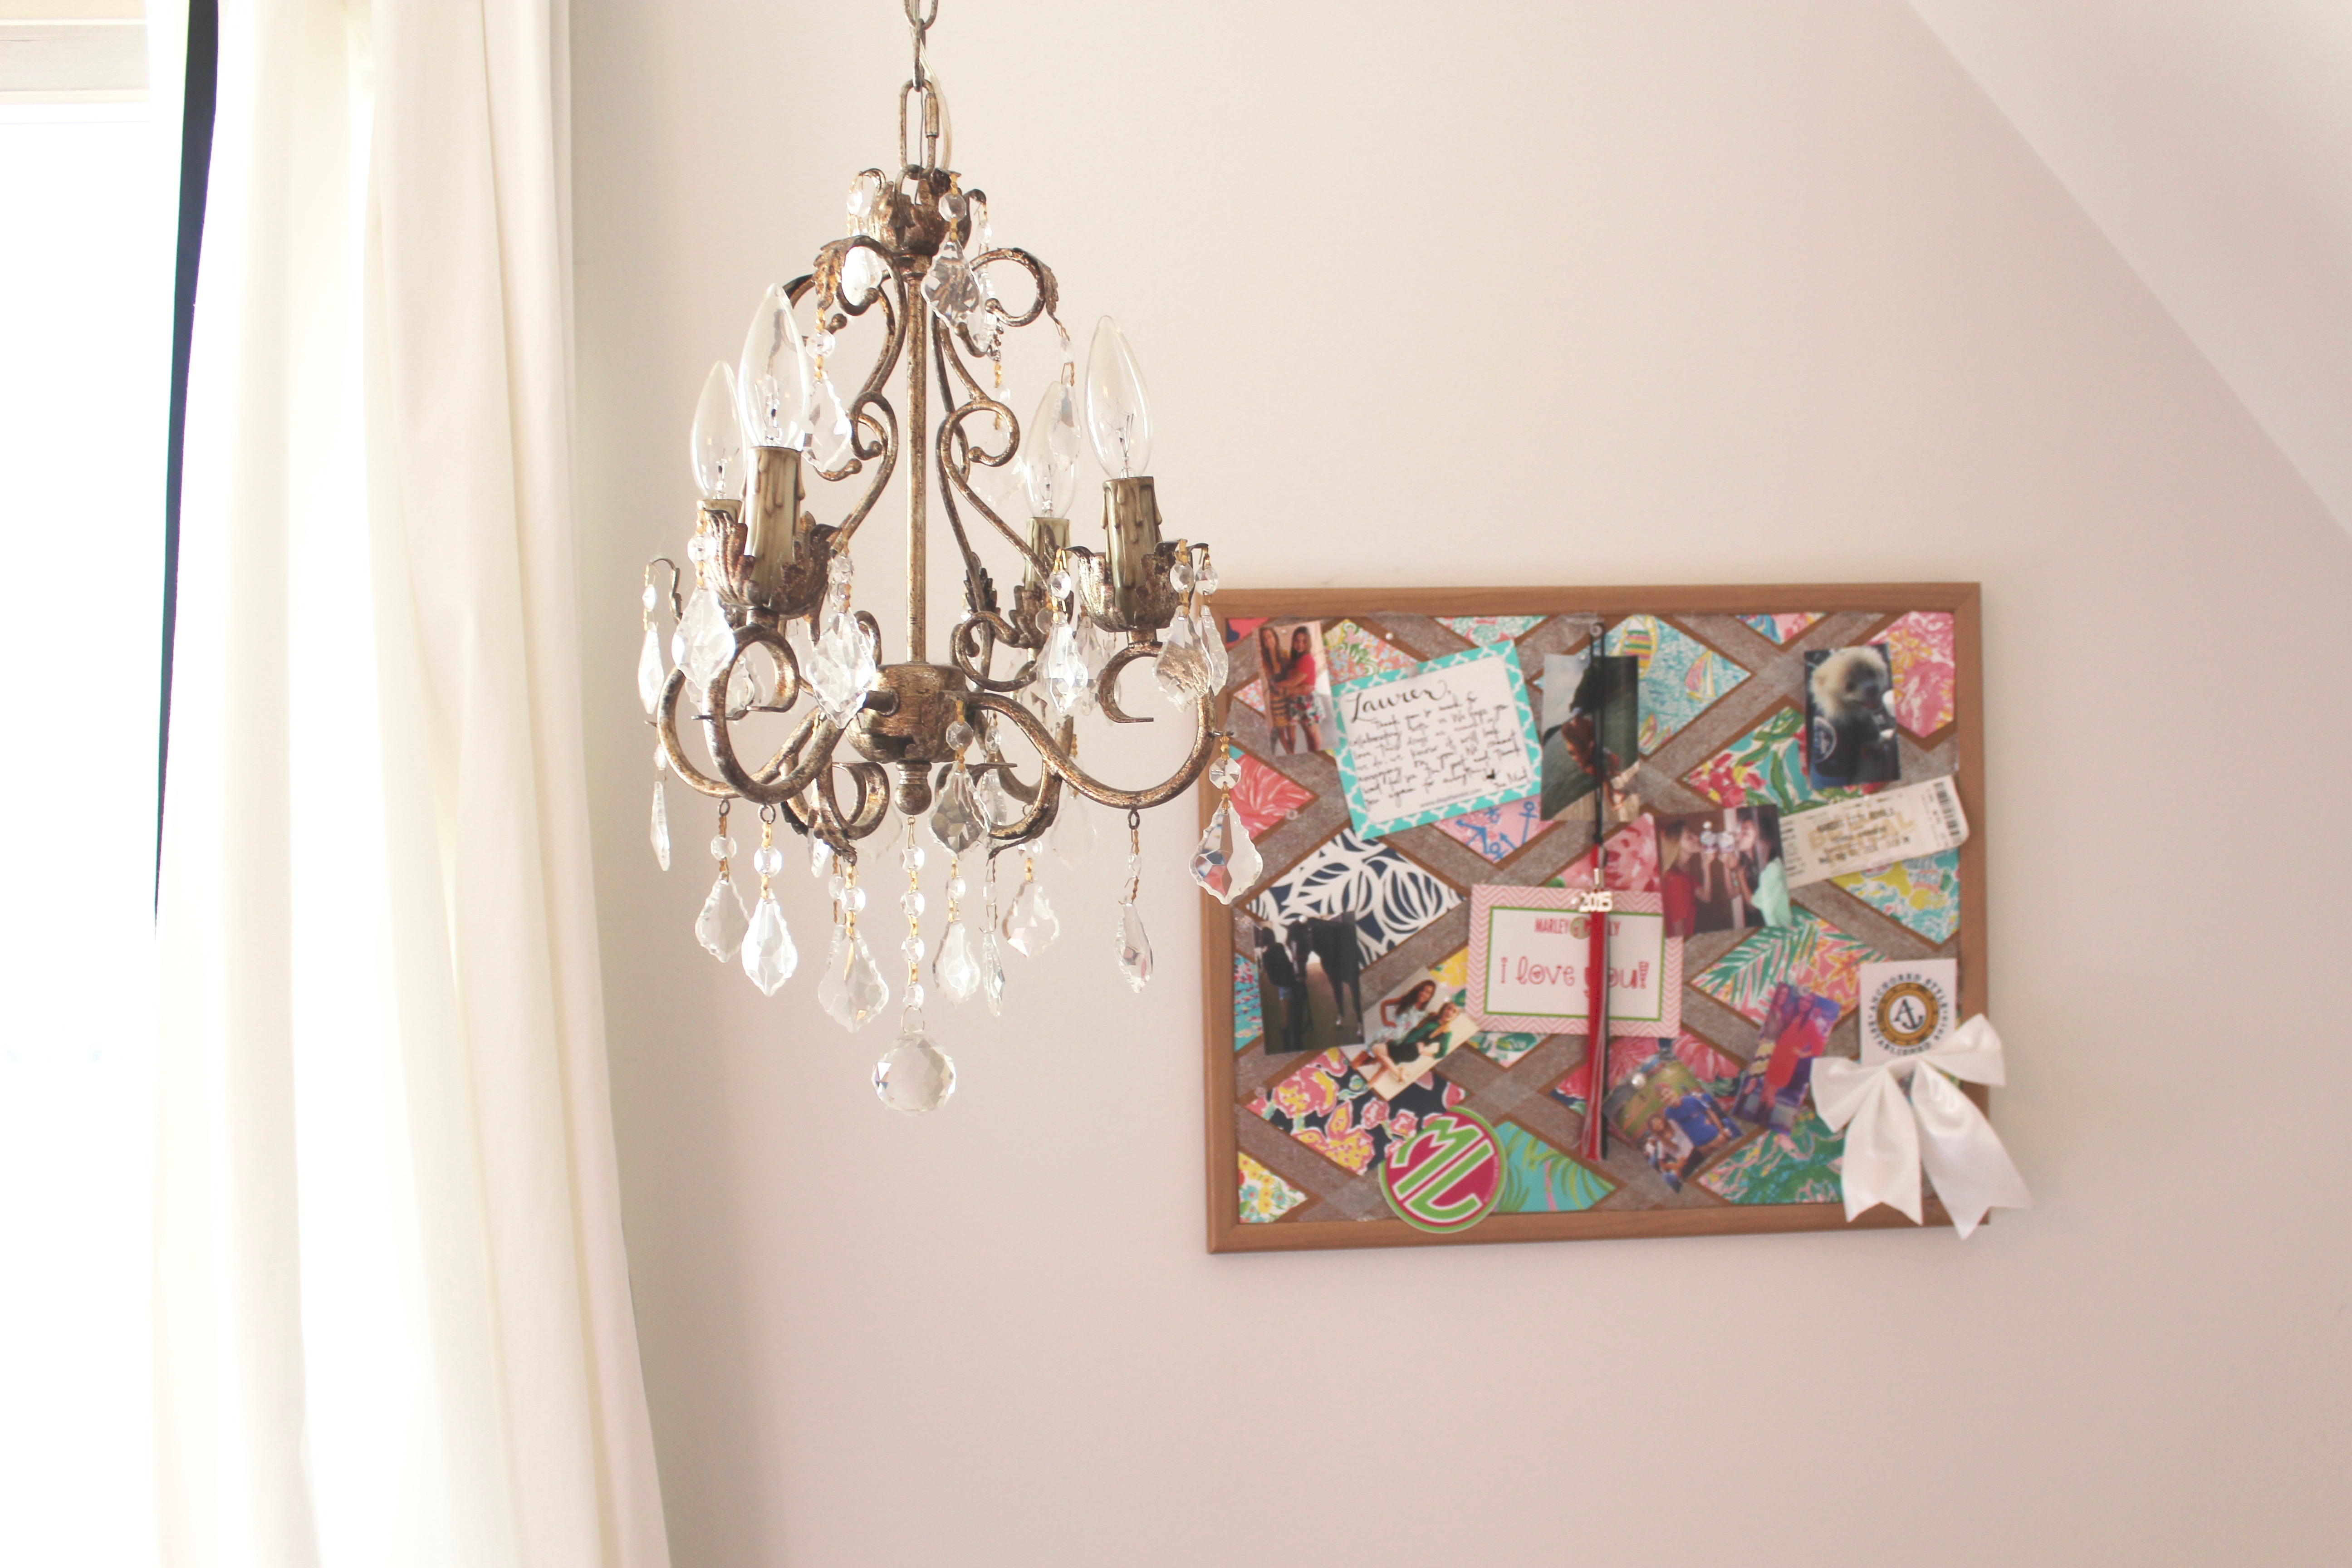 My Room Tour | VIDEO {Lilly Pulitzer Inspired Room}